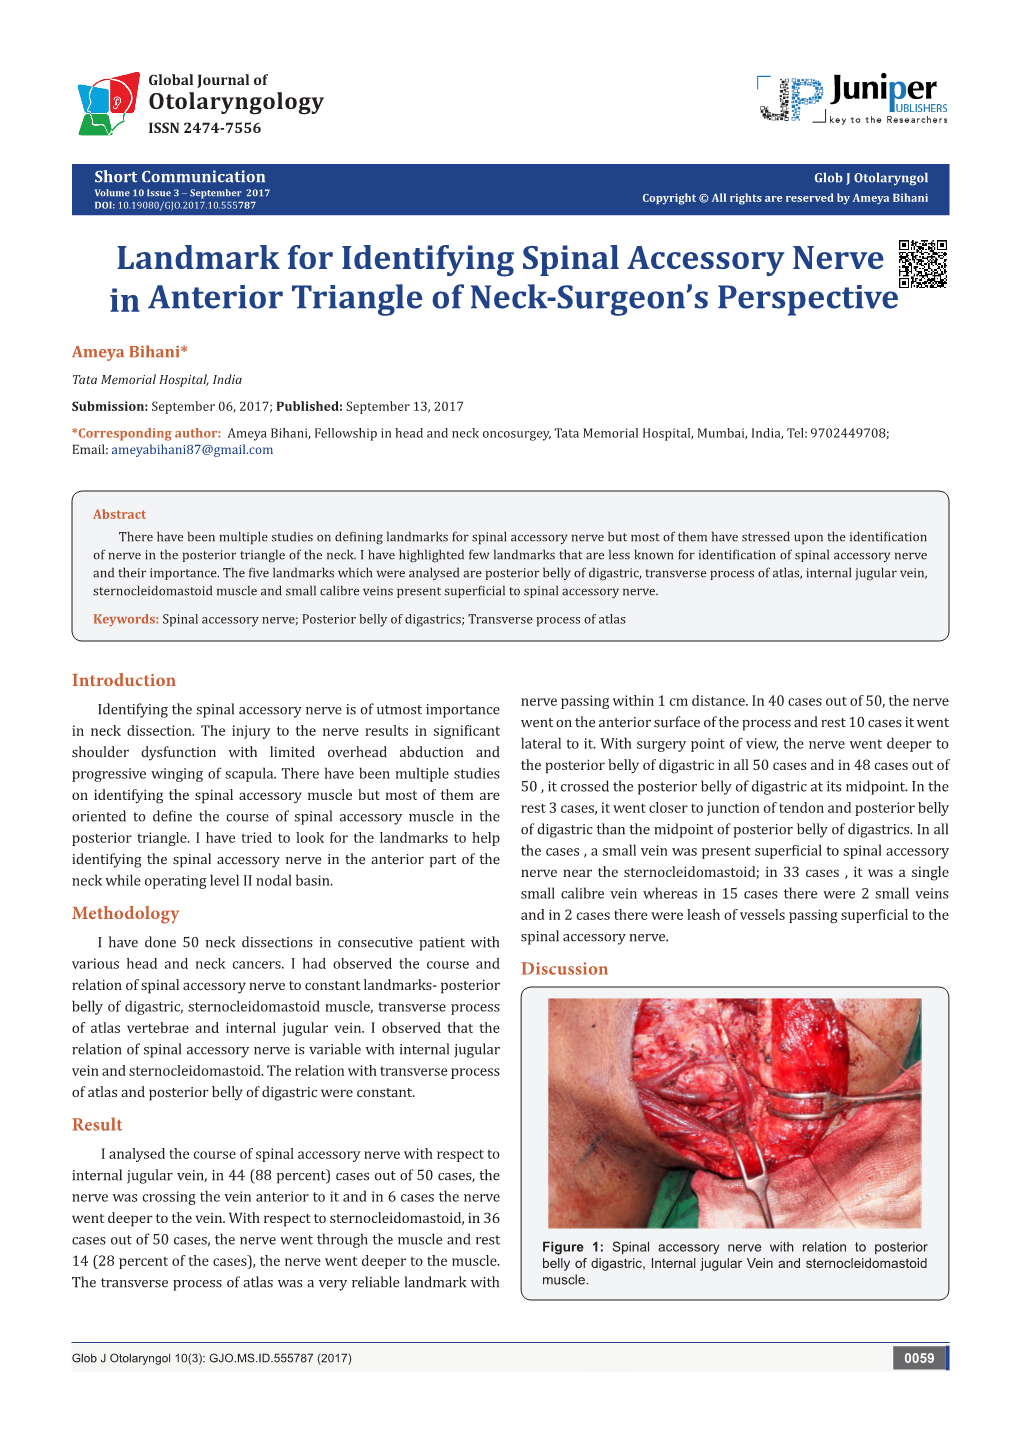 Landmark for Identifying Spinal Accessory Nerve in Anterior Triangle of Neck-Surgeon’S Perspective